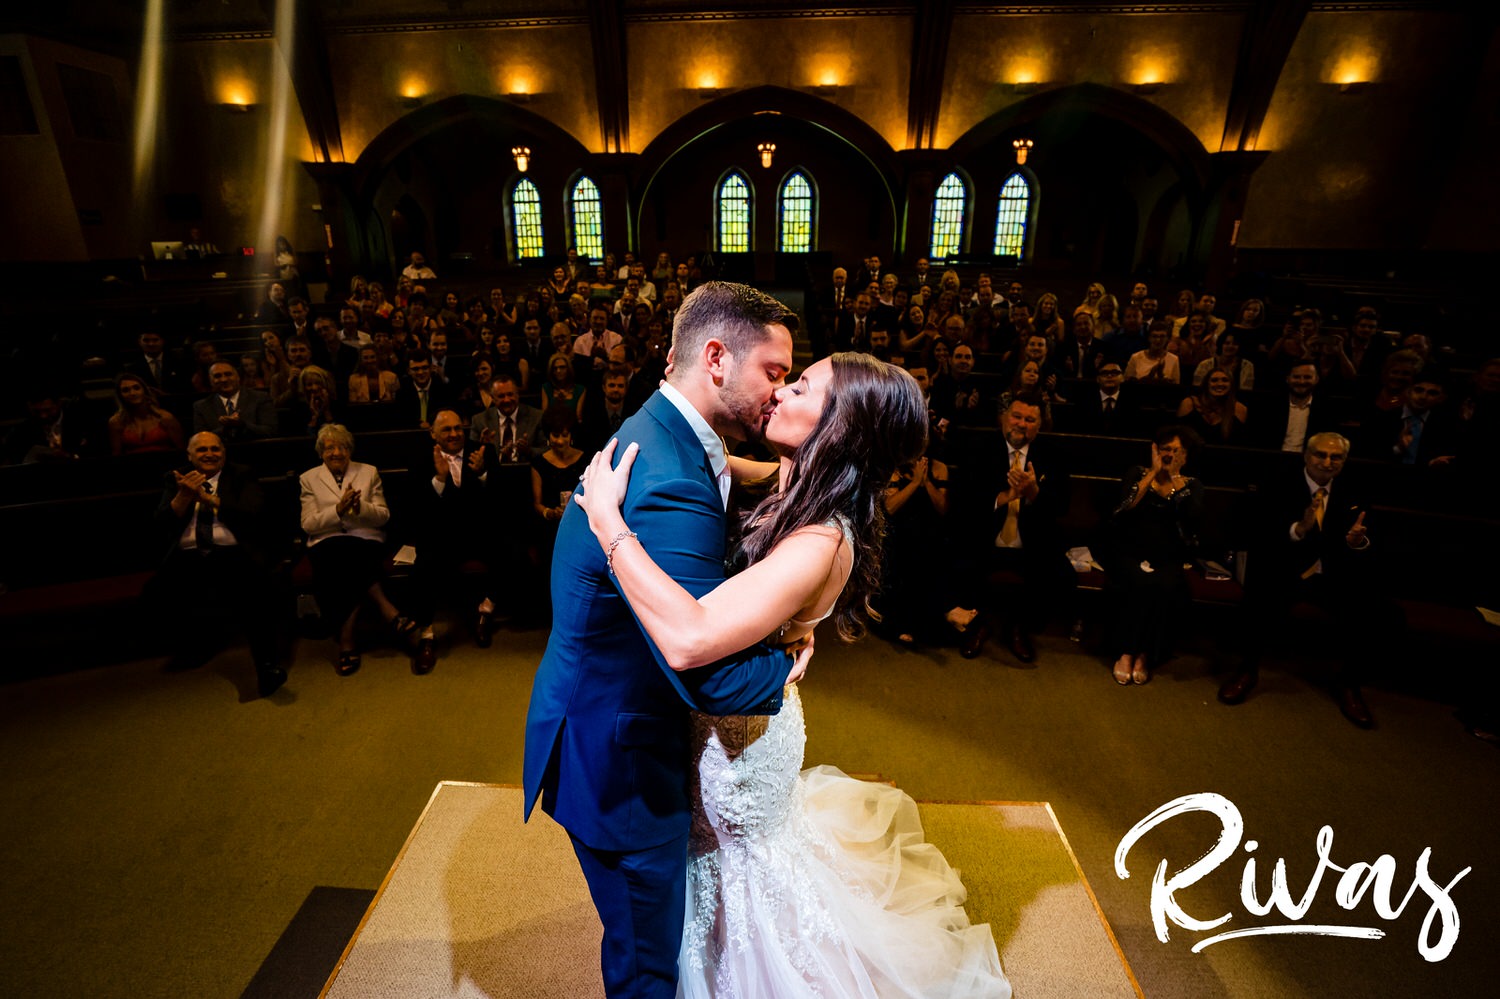 A candid picture taken from behind the bride and groom, looking out at the audience, as they share their first kiss at the end of their wedding ceremony in Kansas City. 